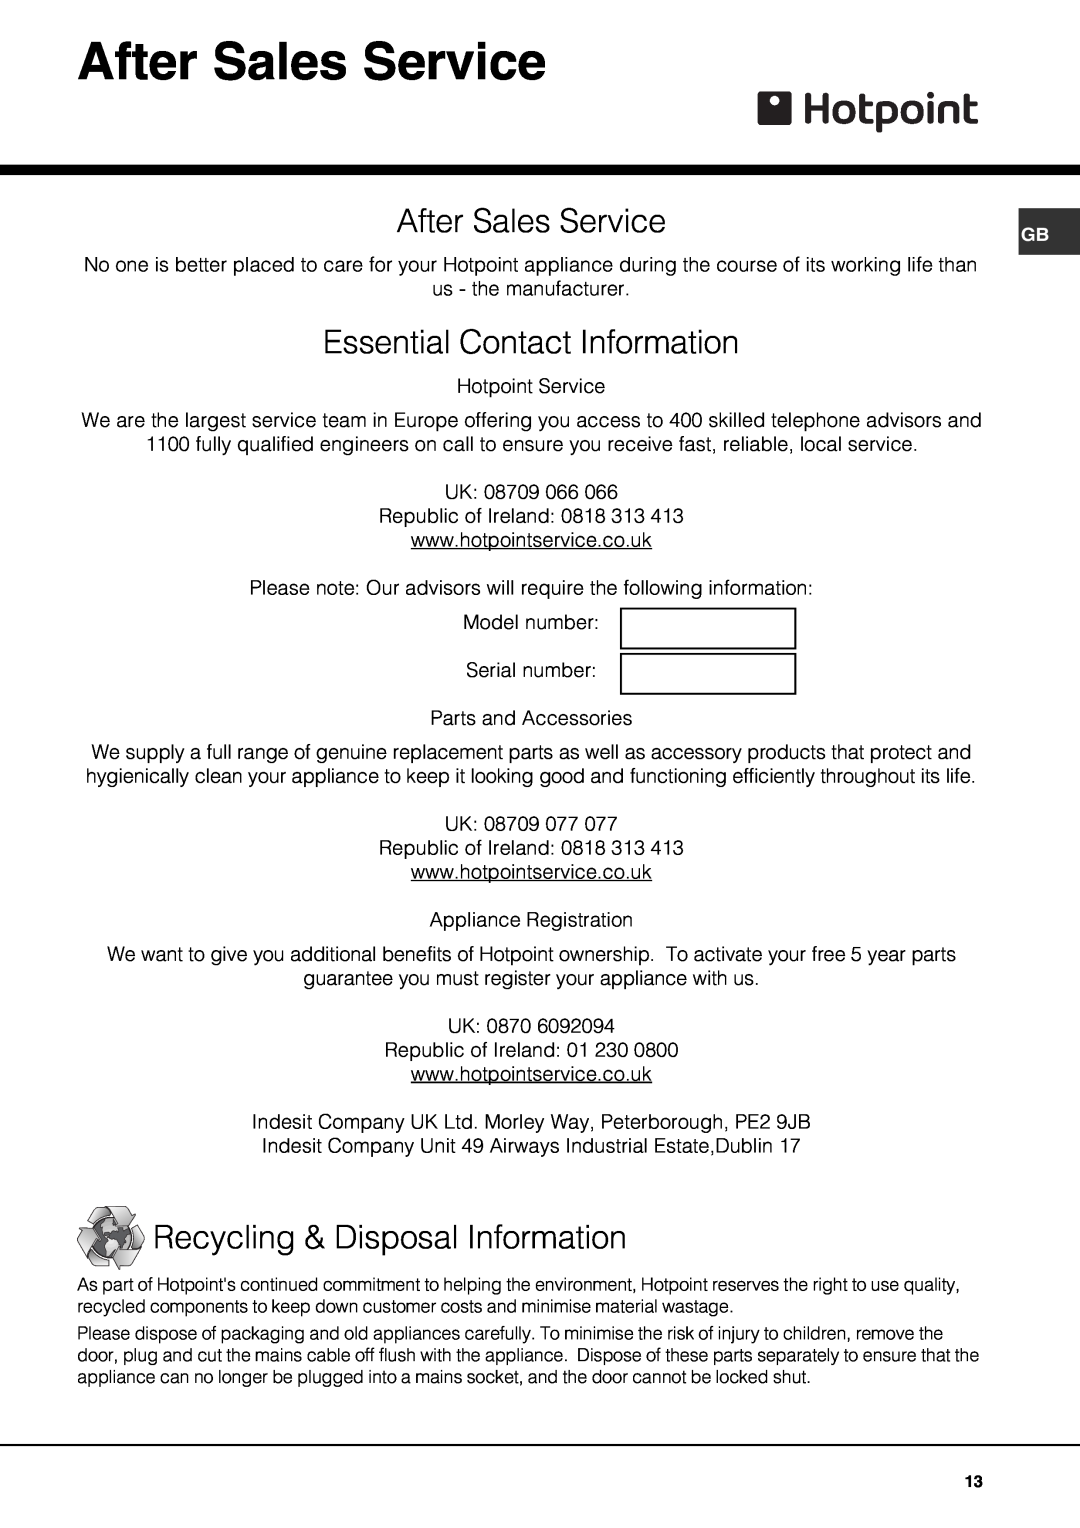 Hotpoint SE61X operating instructions After Sales Service, Essential Contact Information, Recycling & Disposal Information 